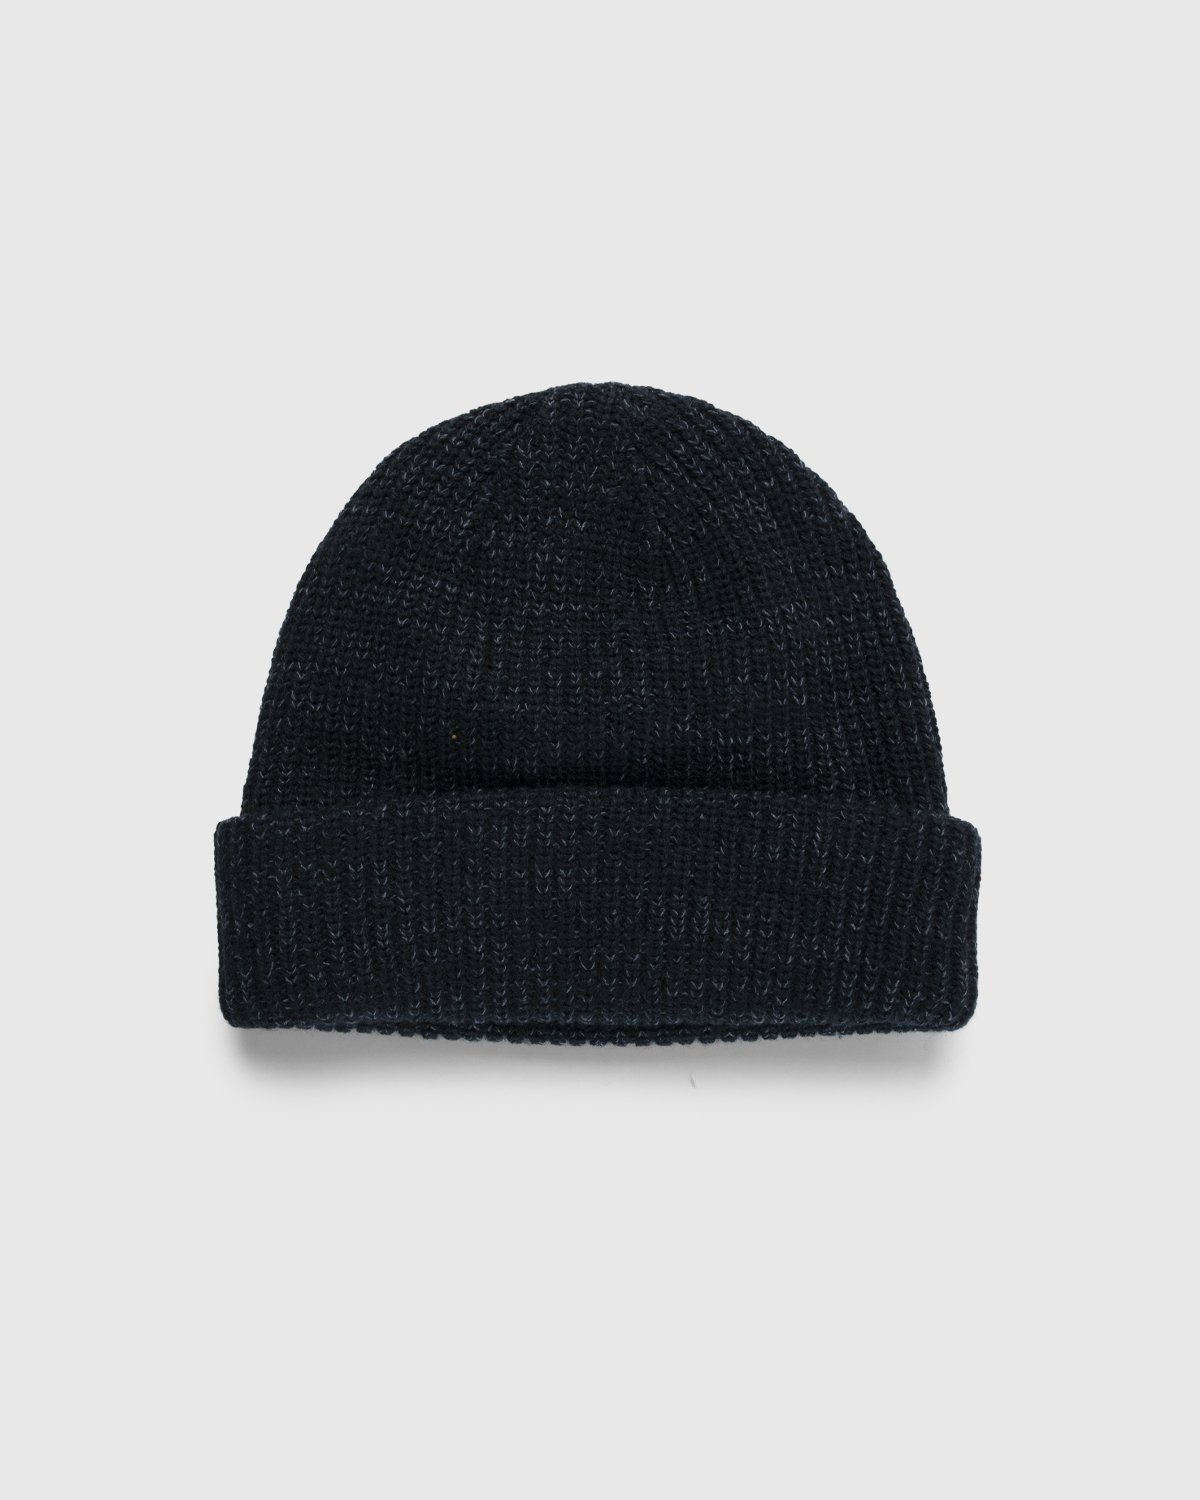 The North Face - Salty Dog Beanie Black - Accessories - Black - Image 2